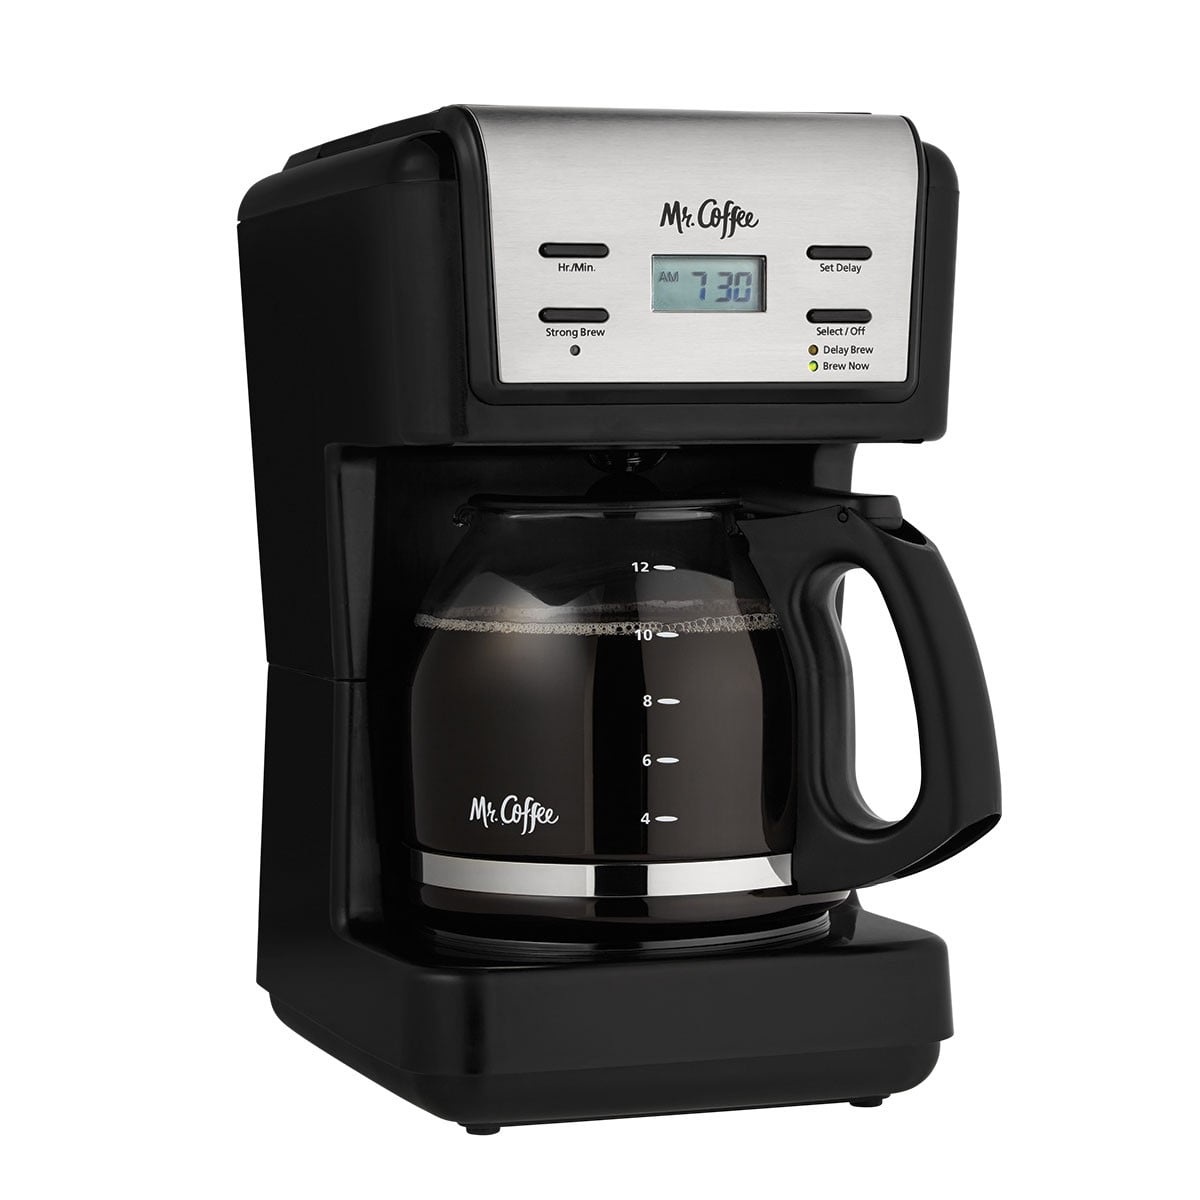 Mr Coffee 12 Cup Programmable Coffee Maker Home Kitchen Timer Modern Black